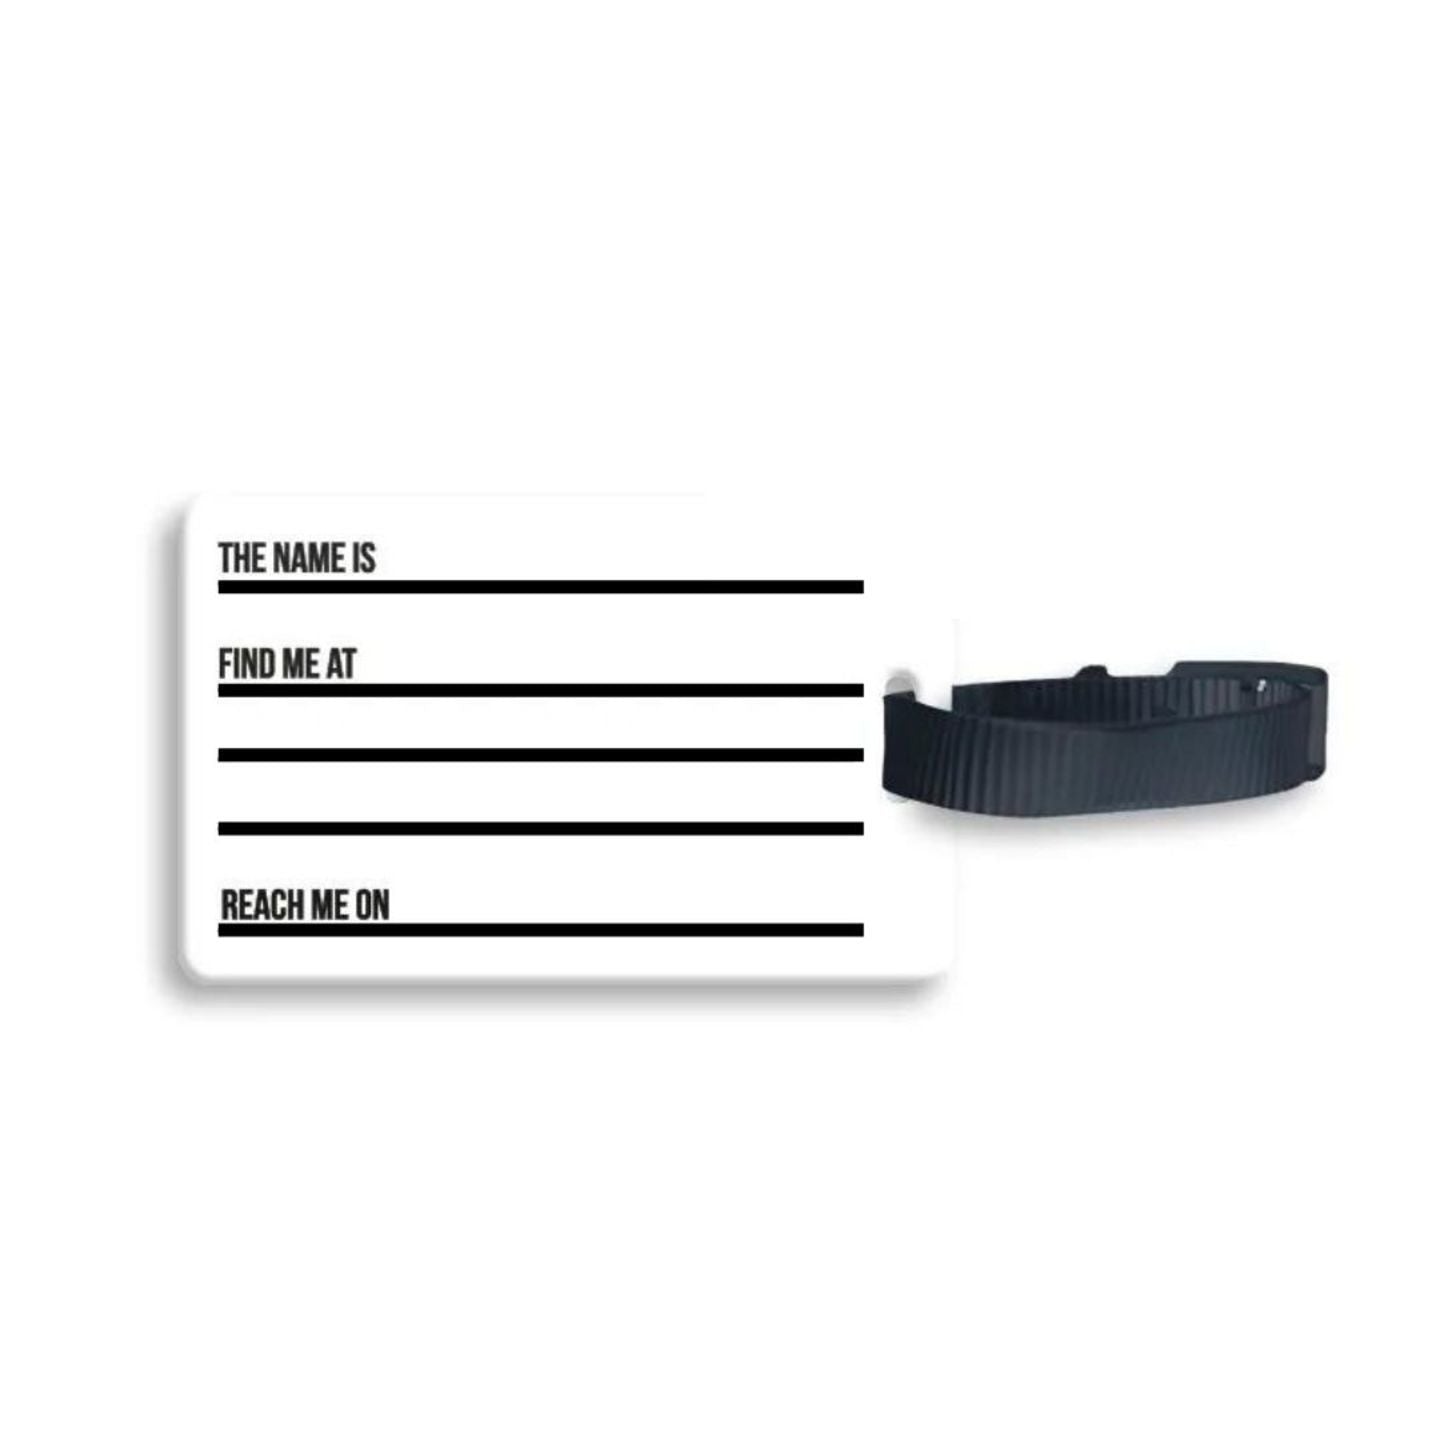 Customized Luggage Tag - For Corporate Gifting, Event Freebies, Promotions